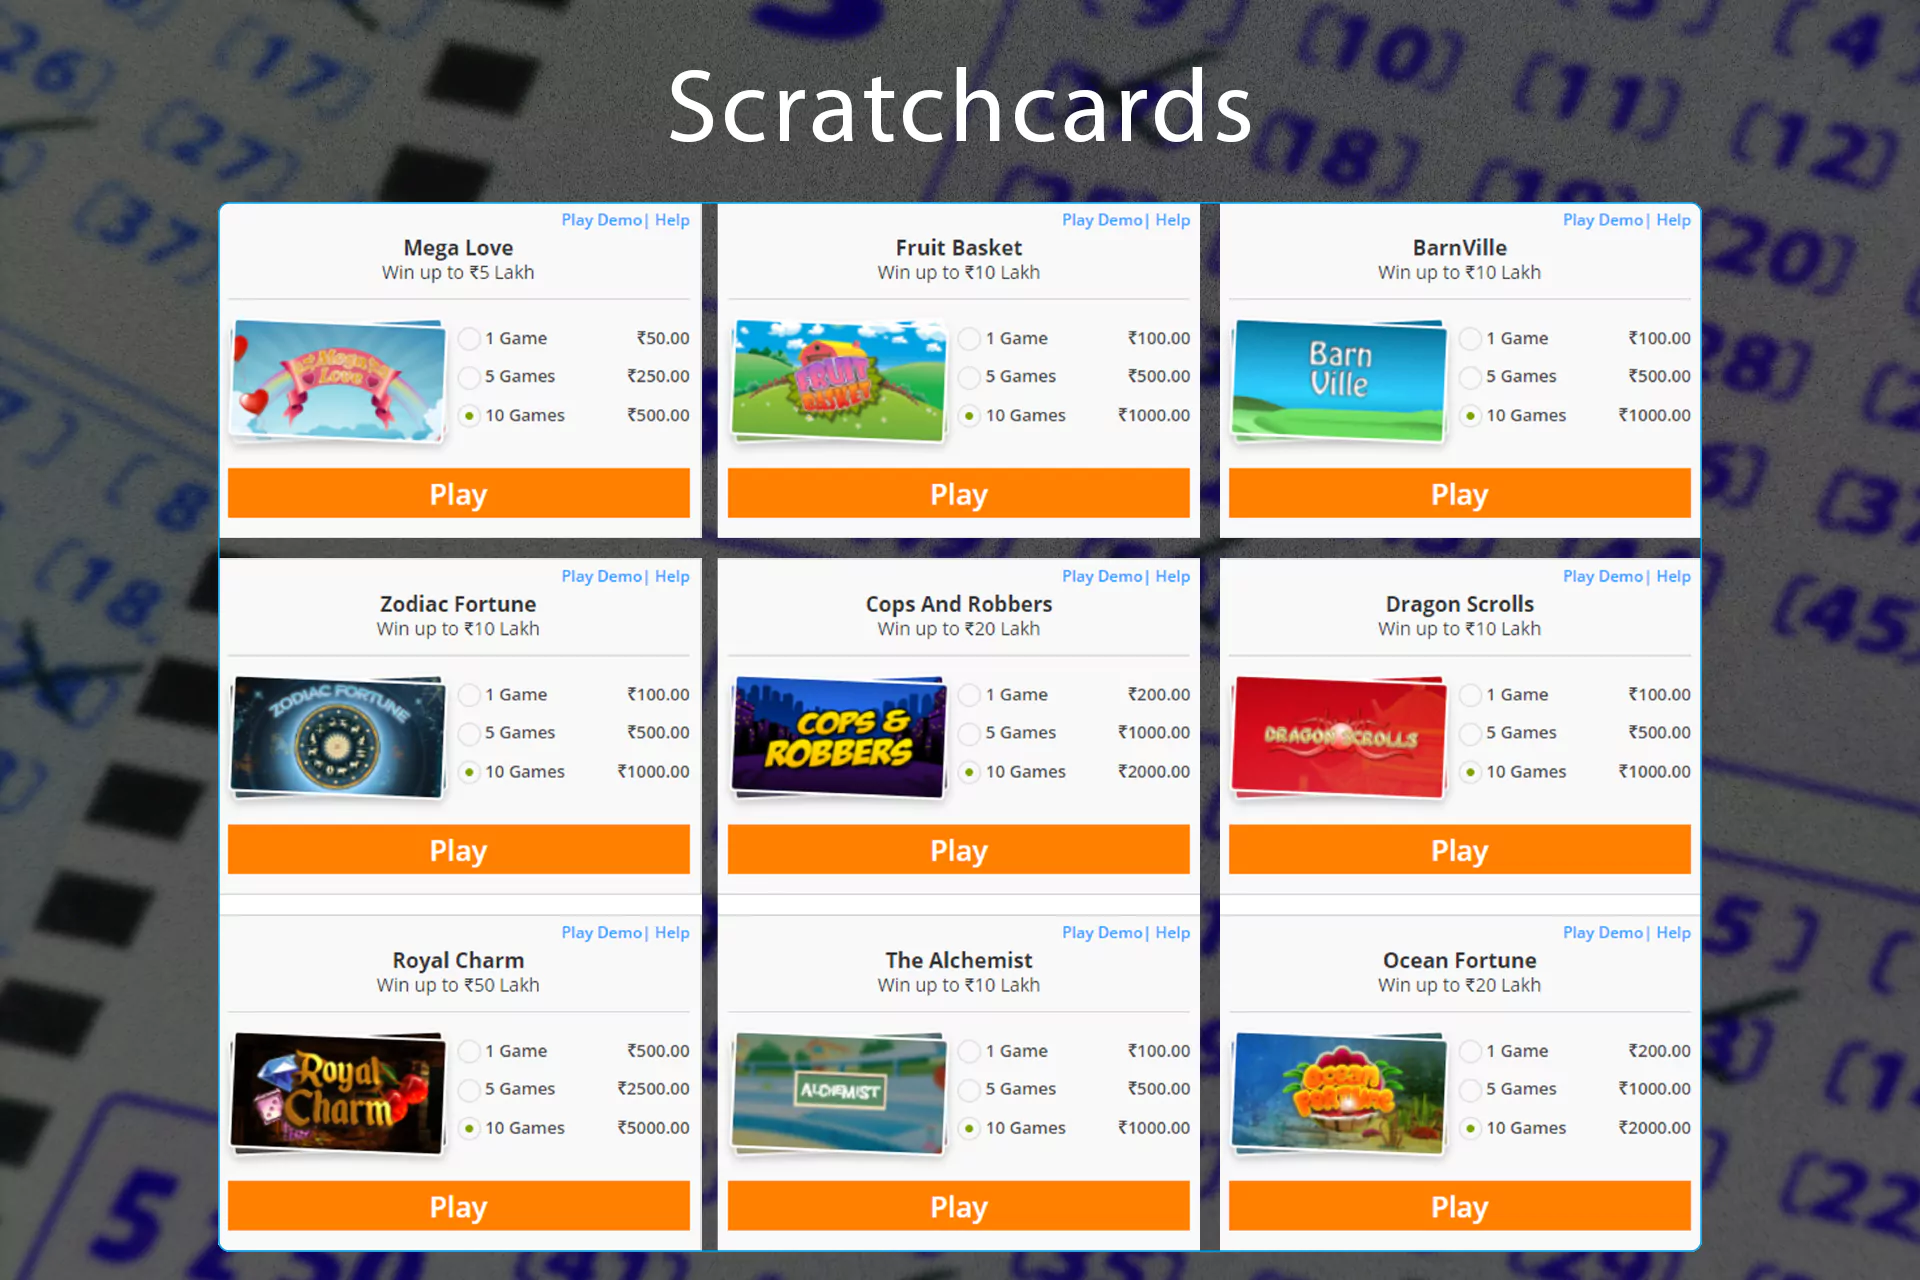 In the section of scratchcards, you find those as are Mega Love, Fruit Basket, Ocean Fortune, and others.